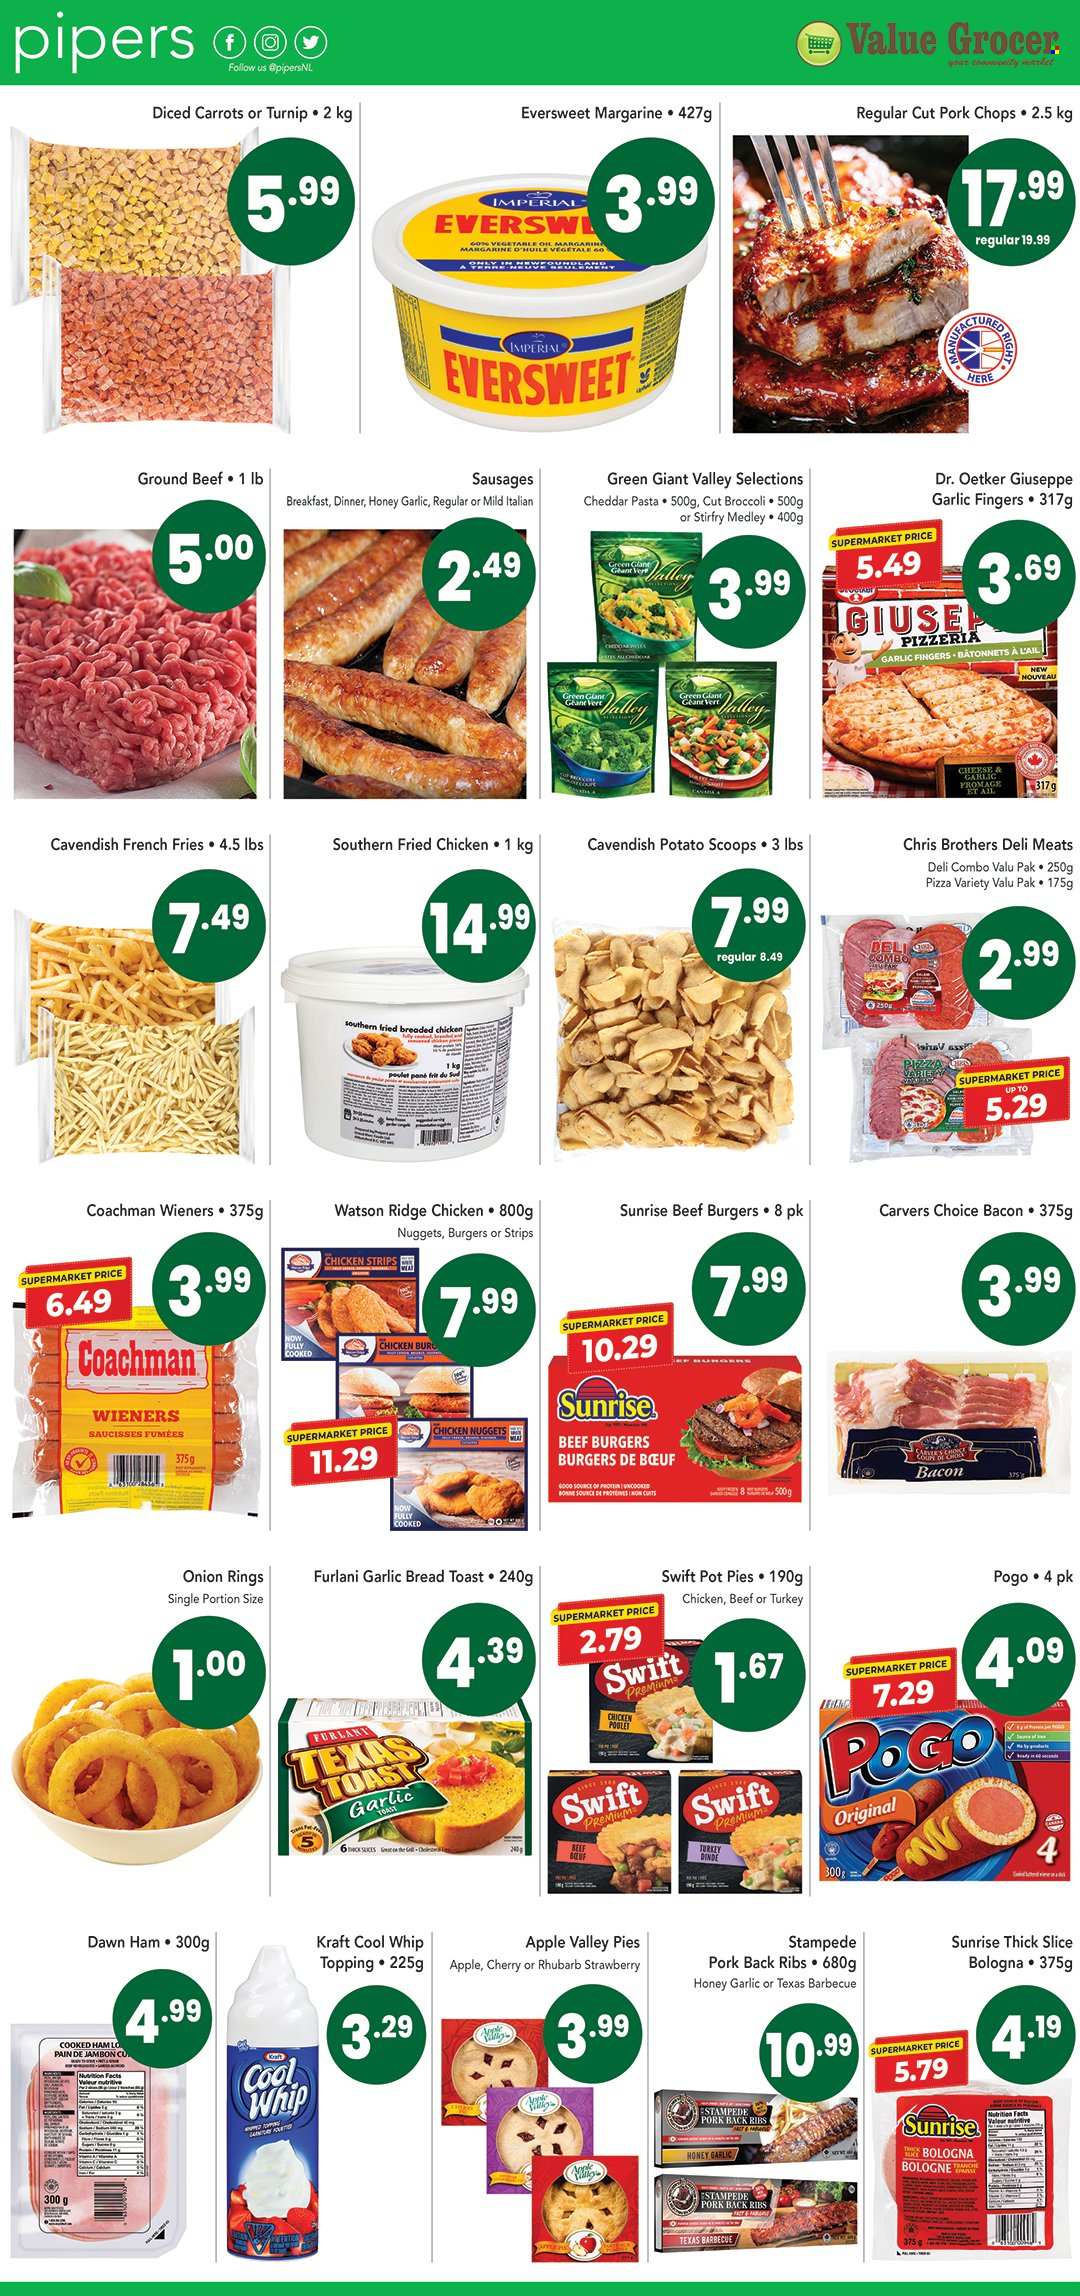 thumbnail - Pipers Flyer - March 16, 2023 - March 22, 2023 - Sales products - bread, pot pie, broccoli, carrots, rhubarb, cherries, pizza, onion rings, nuggets, hamburger, pasta, fried chicken, chicken nuggets, beef burger, Kraft®, bacon, cooked ham, ham, bologna sausage, sausage, cheddar, Dr. Oetker, margarine, Cool Whip, strips, chicken strips, potato fries, french fries, topping, vegetable oil, oil, honey, BROTHERS, chicken, turkey, beef meat, ground beef, ribs, pork chops, pork meat, pork ribs, pork back ribs, pen. Page 2.